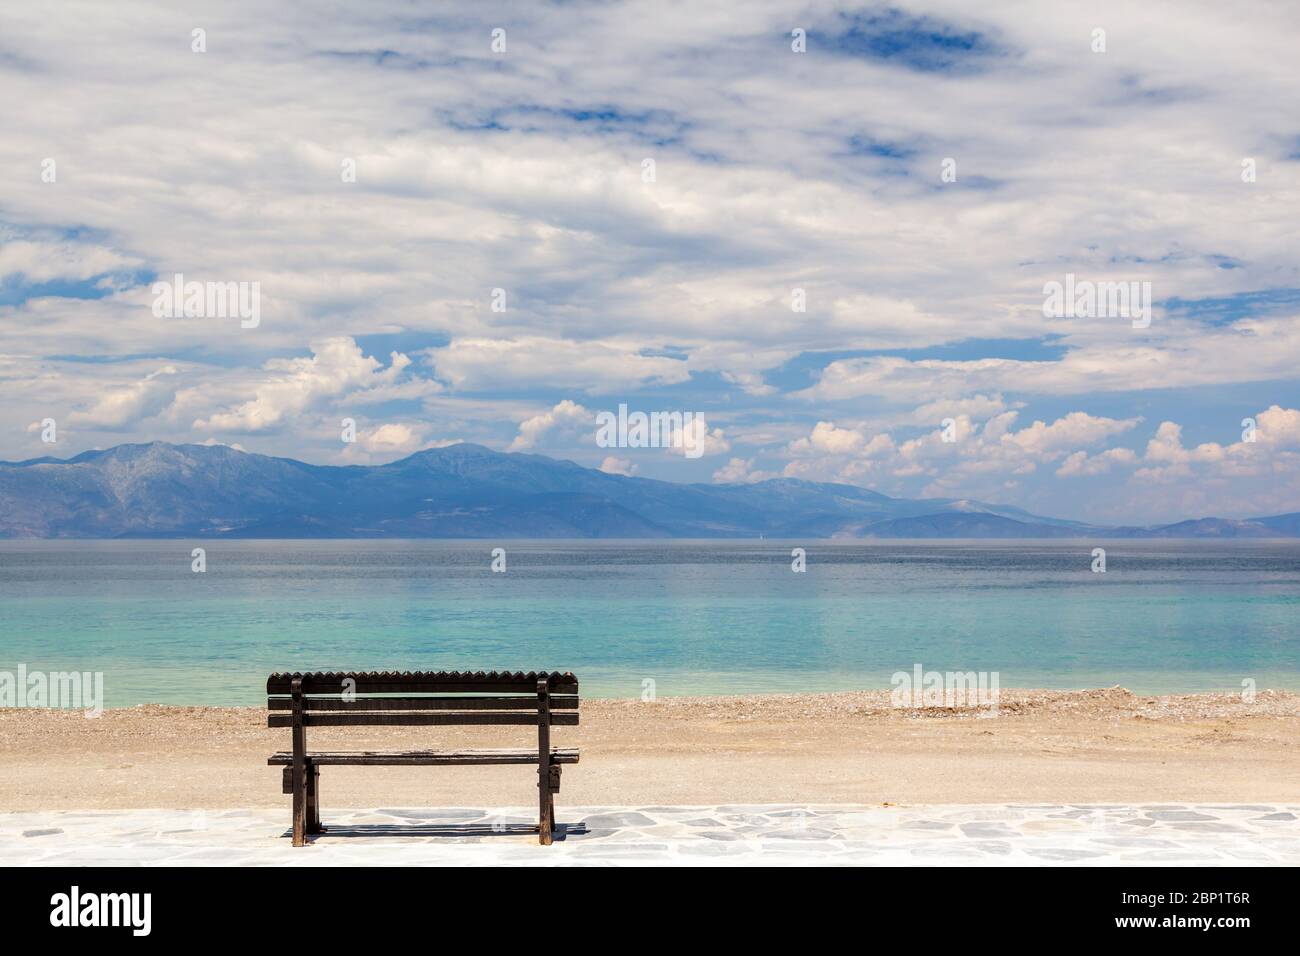 Empty wooden bench by the sea in a cloudy day, gazing the Corinthian gulf, near Xylokastro town, in Peloponnese, Greece. Stock Photo